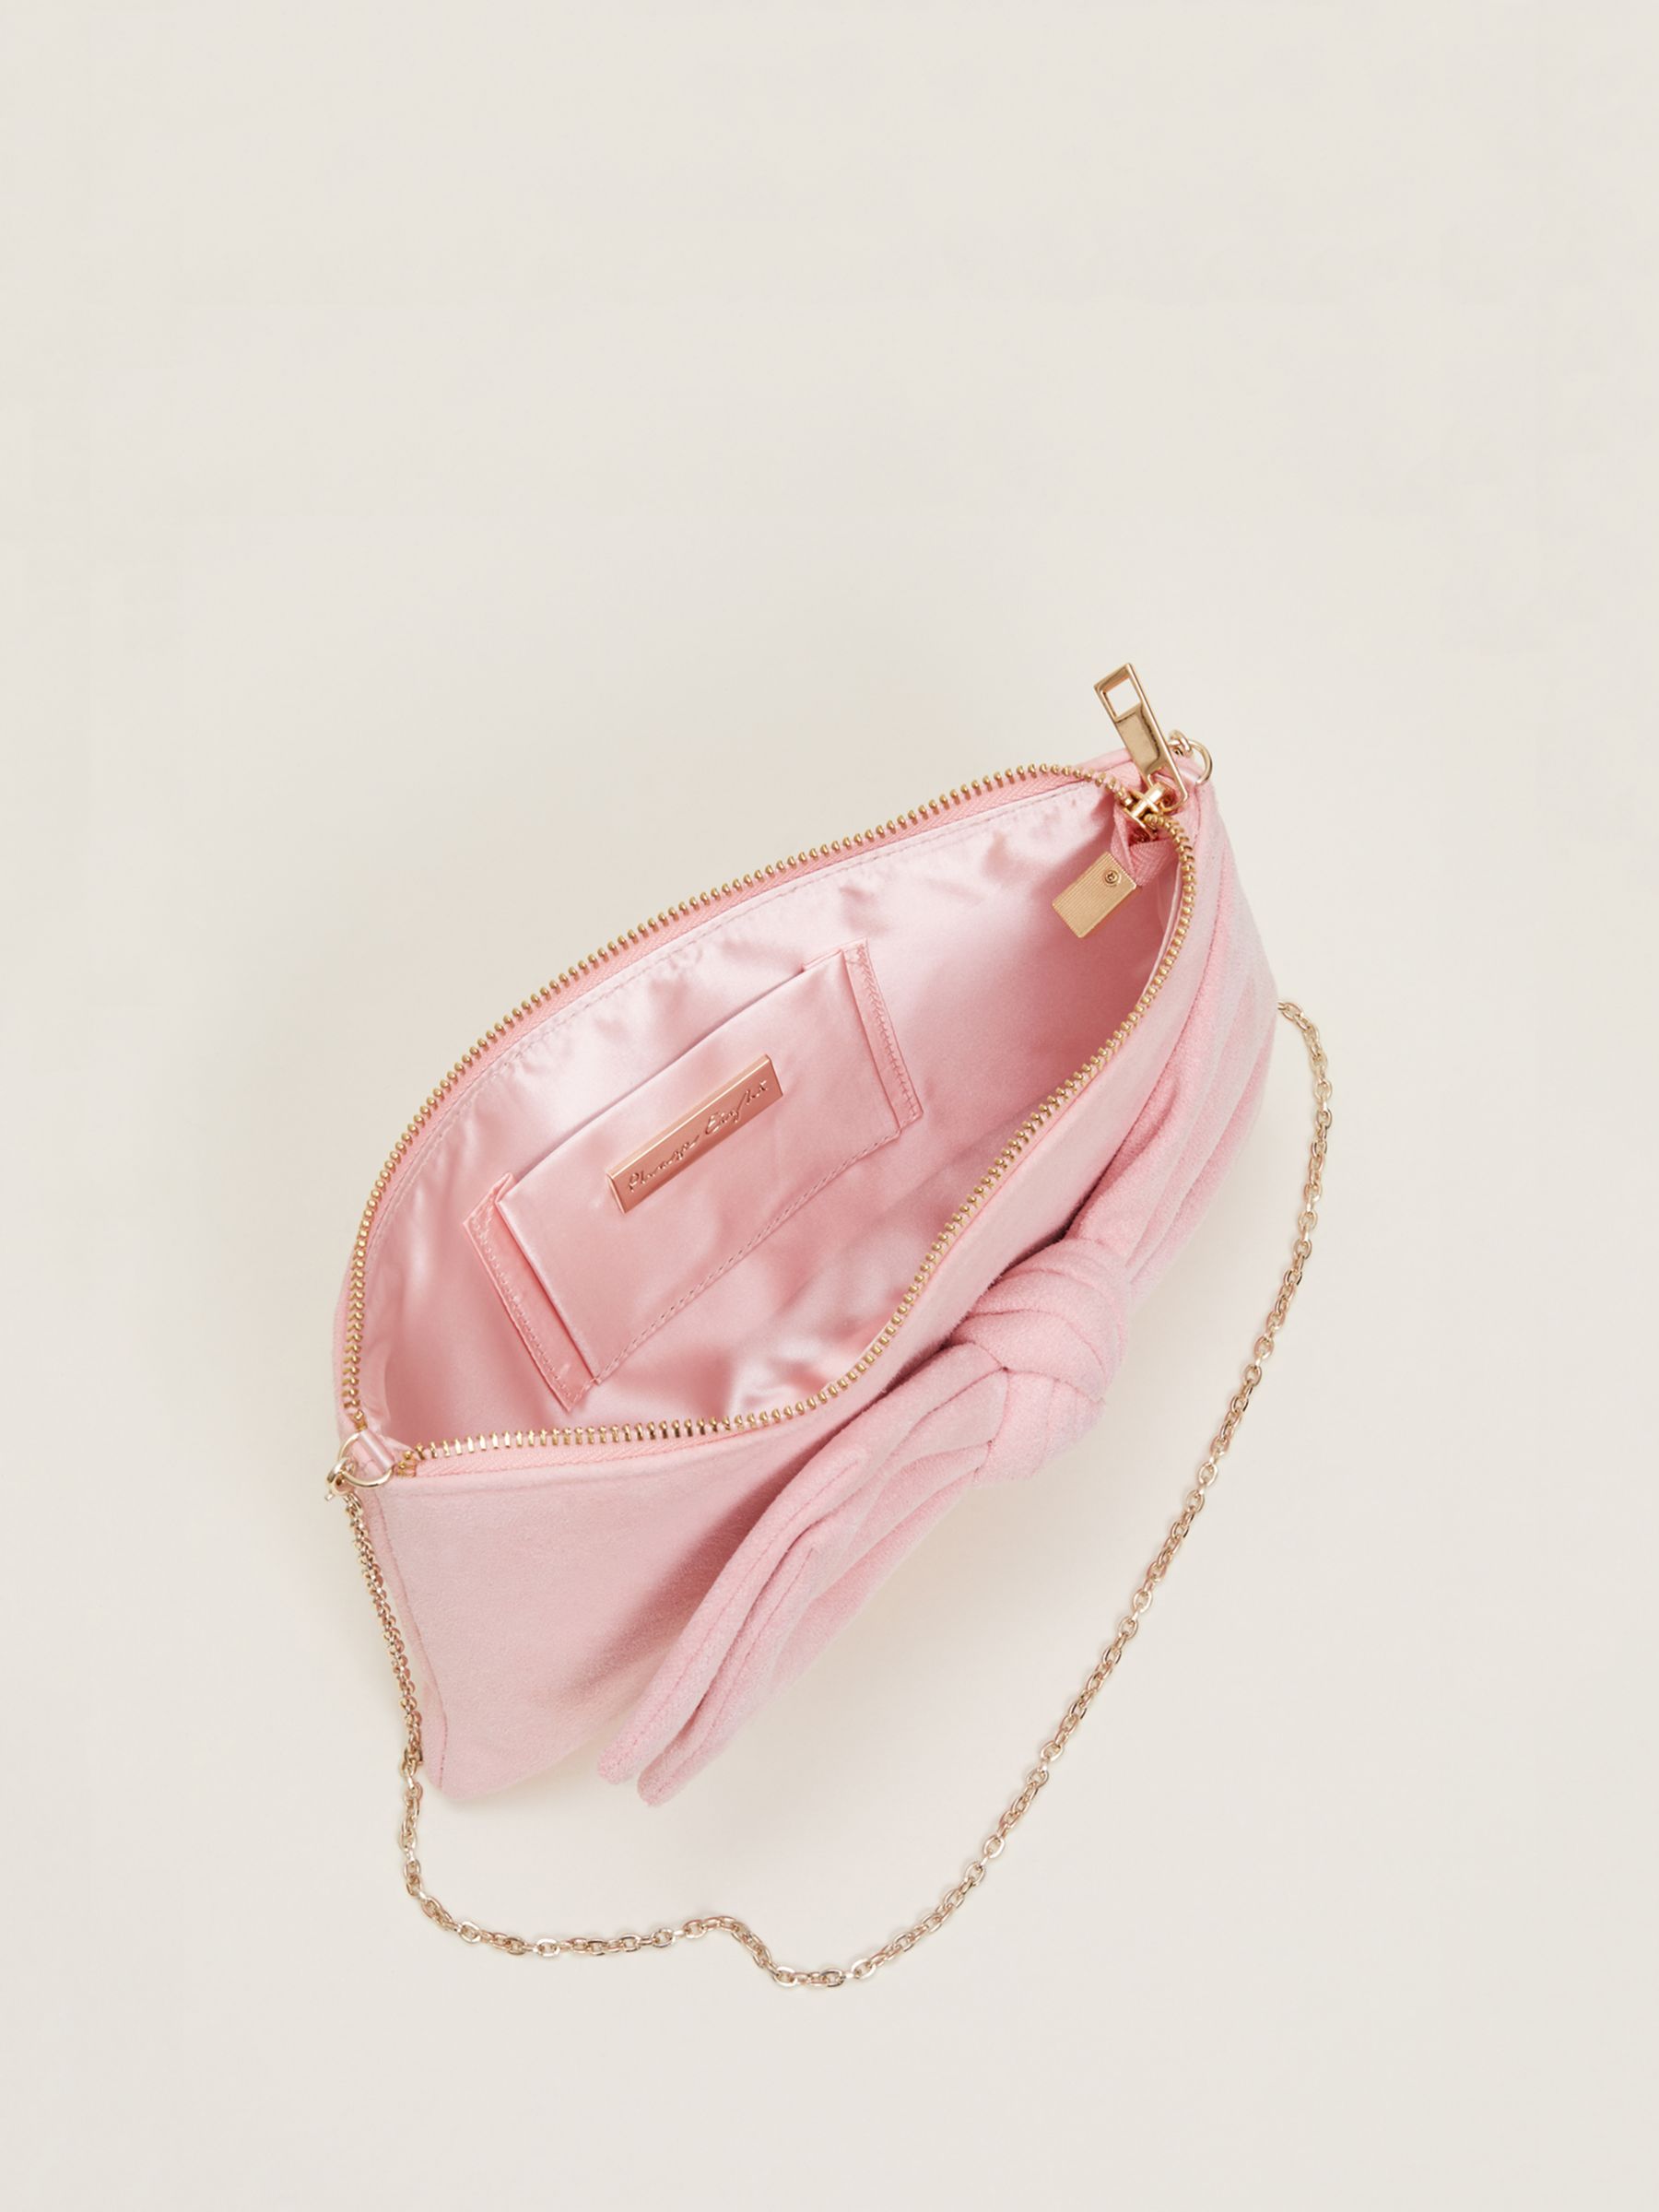 Buy Phase Eight Suede Bow Clutch, Pink Online at johnlewis.com